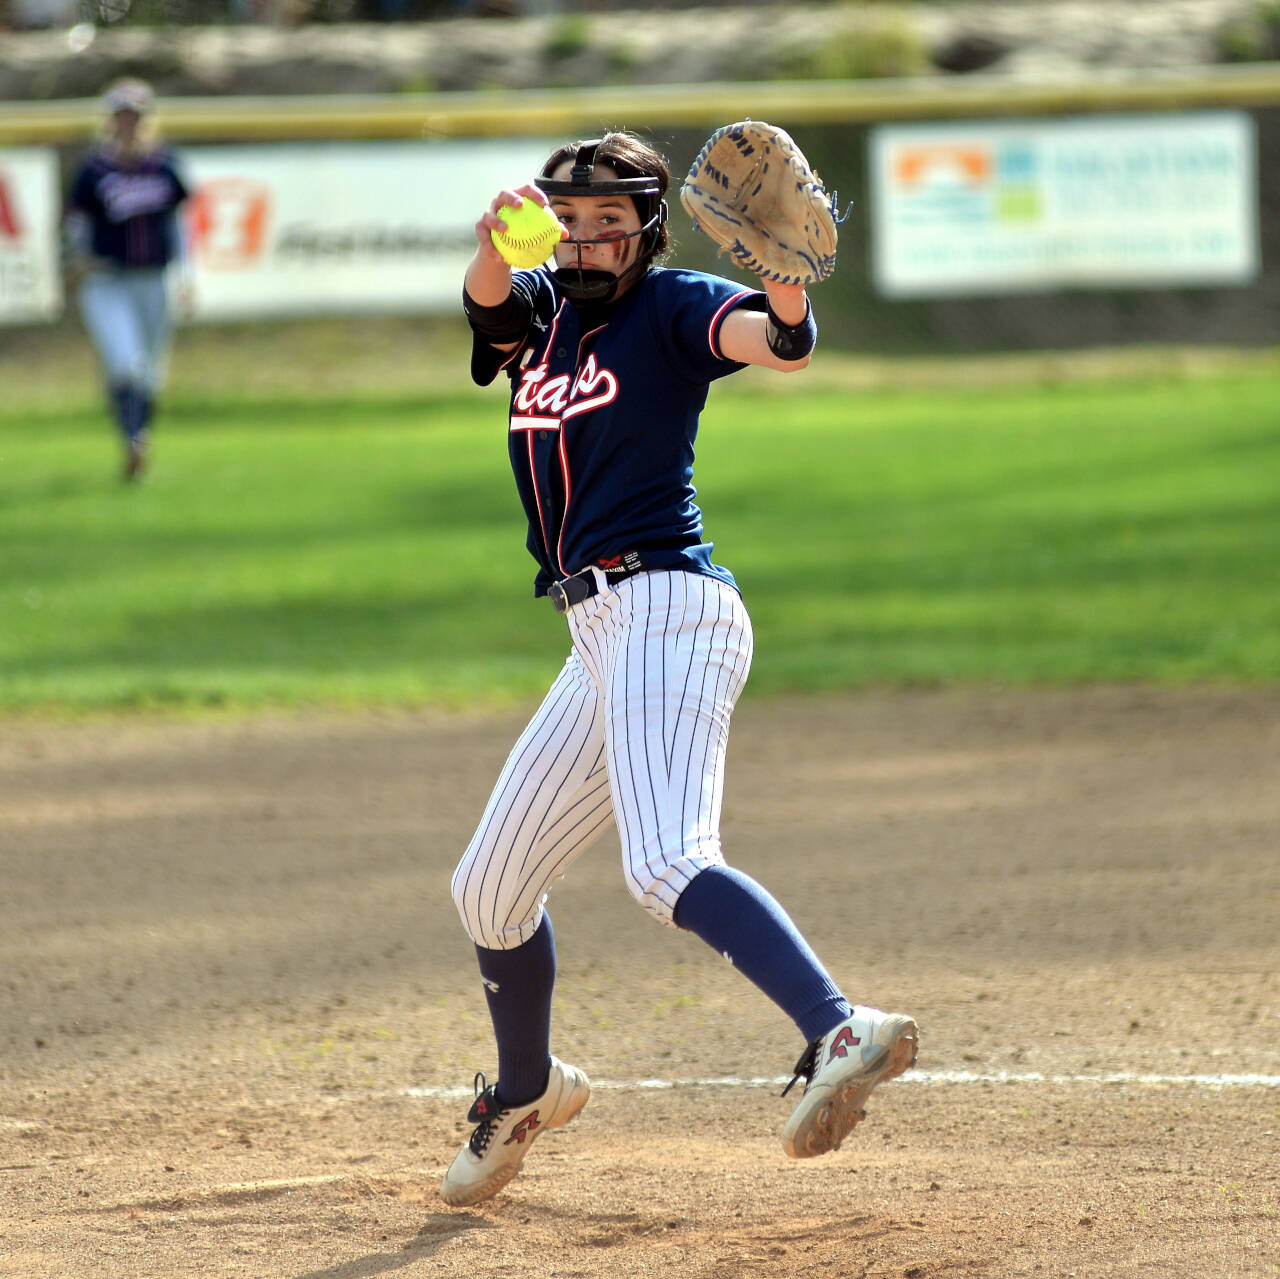 RYAN SPARKS | THE DAILY WORLD Pe Ell-Willapa Valley pitcher Dani Shannon allowed one run in three innings to pick up the win in Game 2 of a doubleheader against Ocosta on Tuesday in Westport.